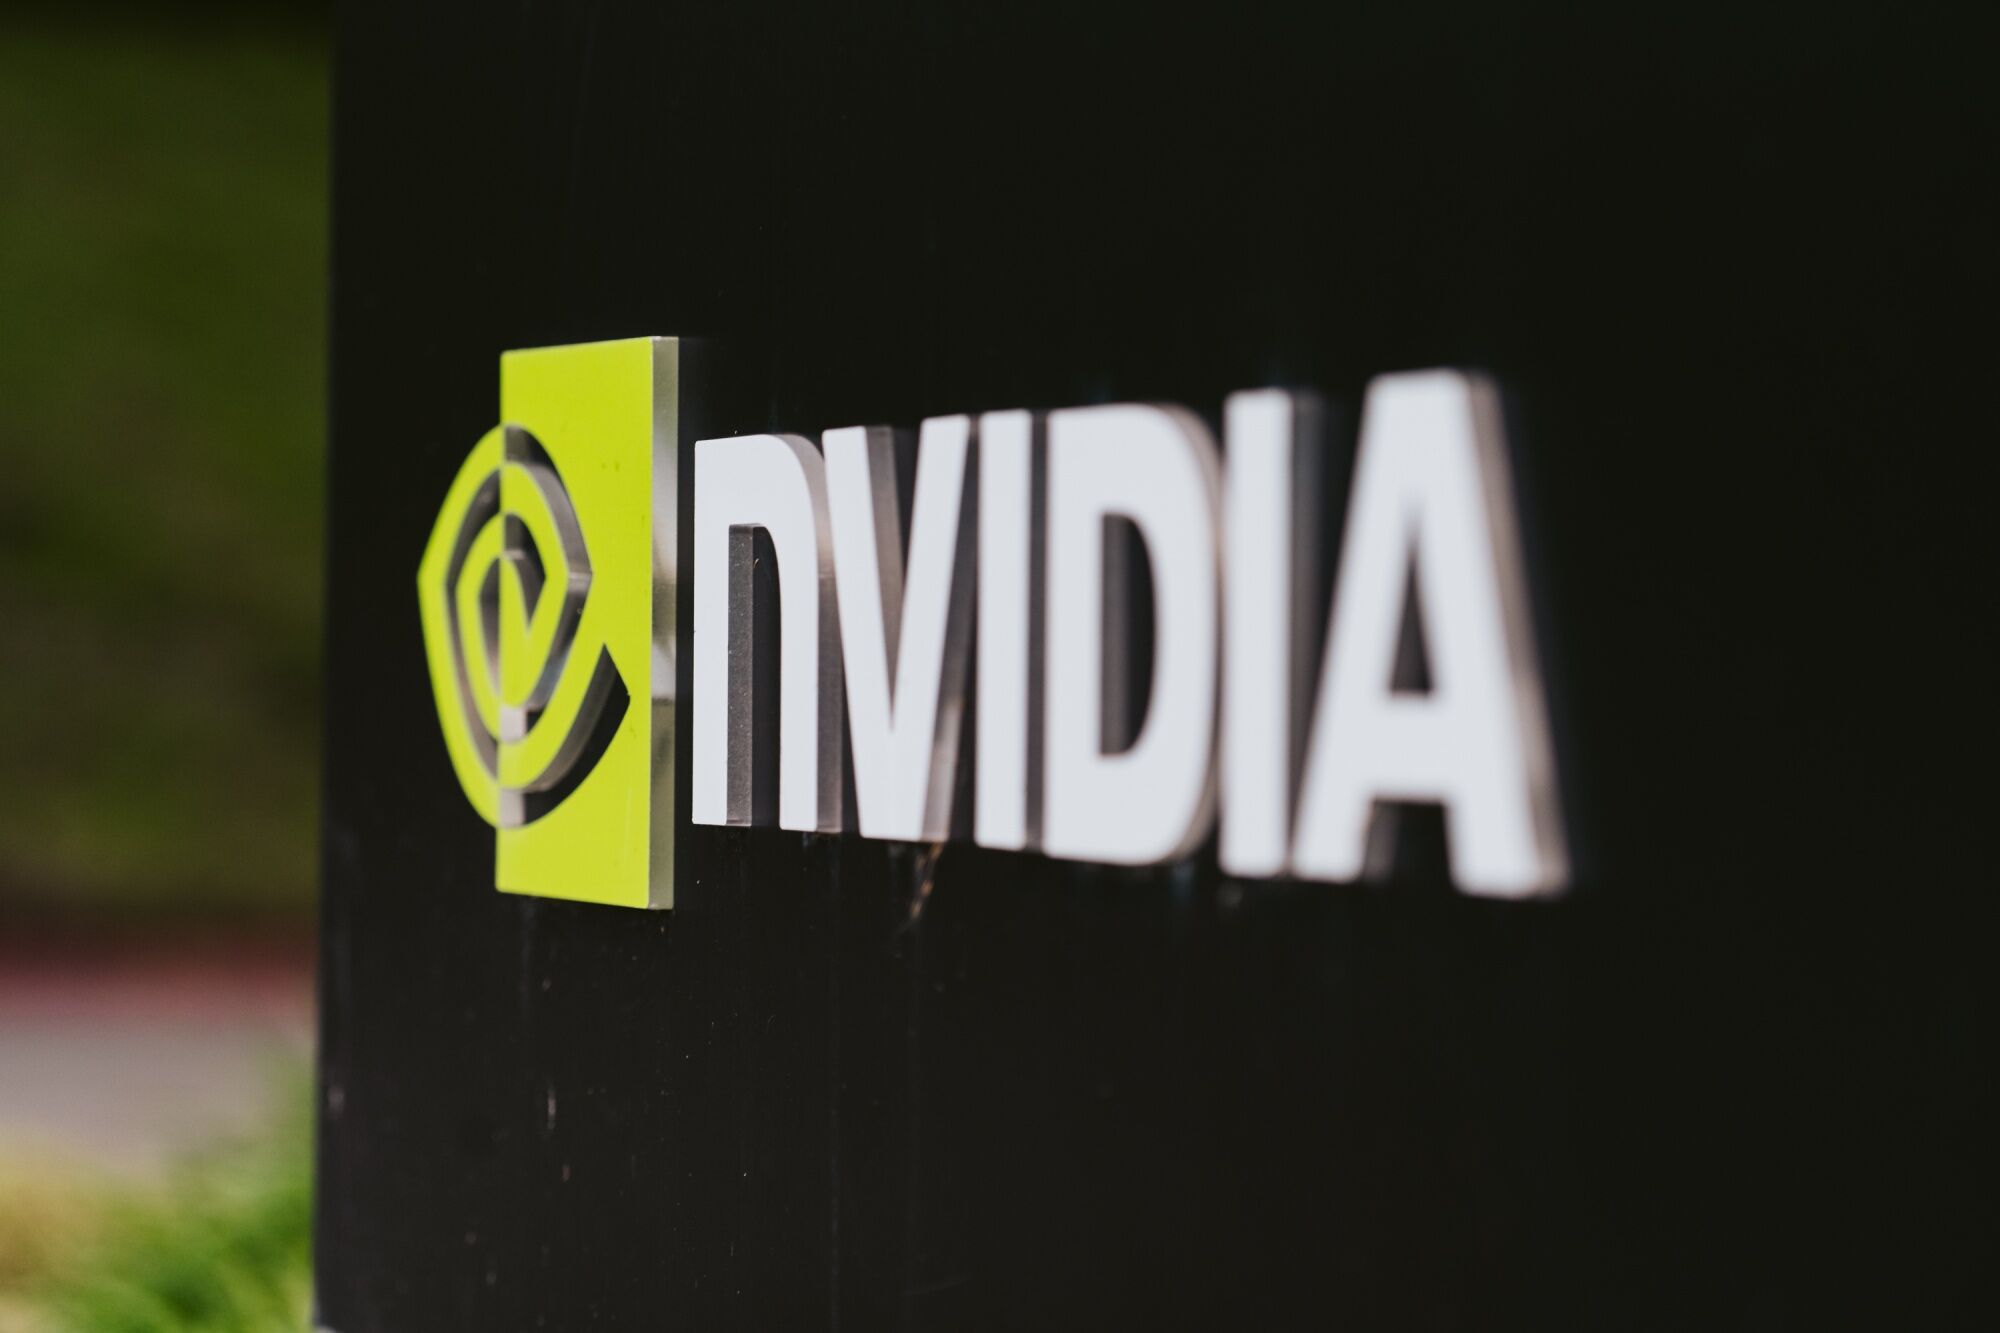 Nvidia Surpasses Microsoft to Become the Most Valuable Publicly Traded Company